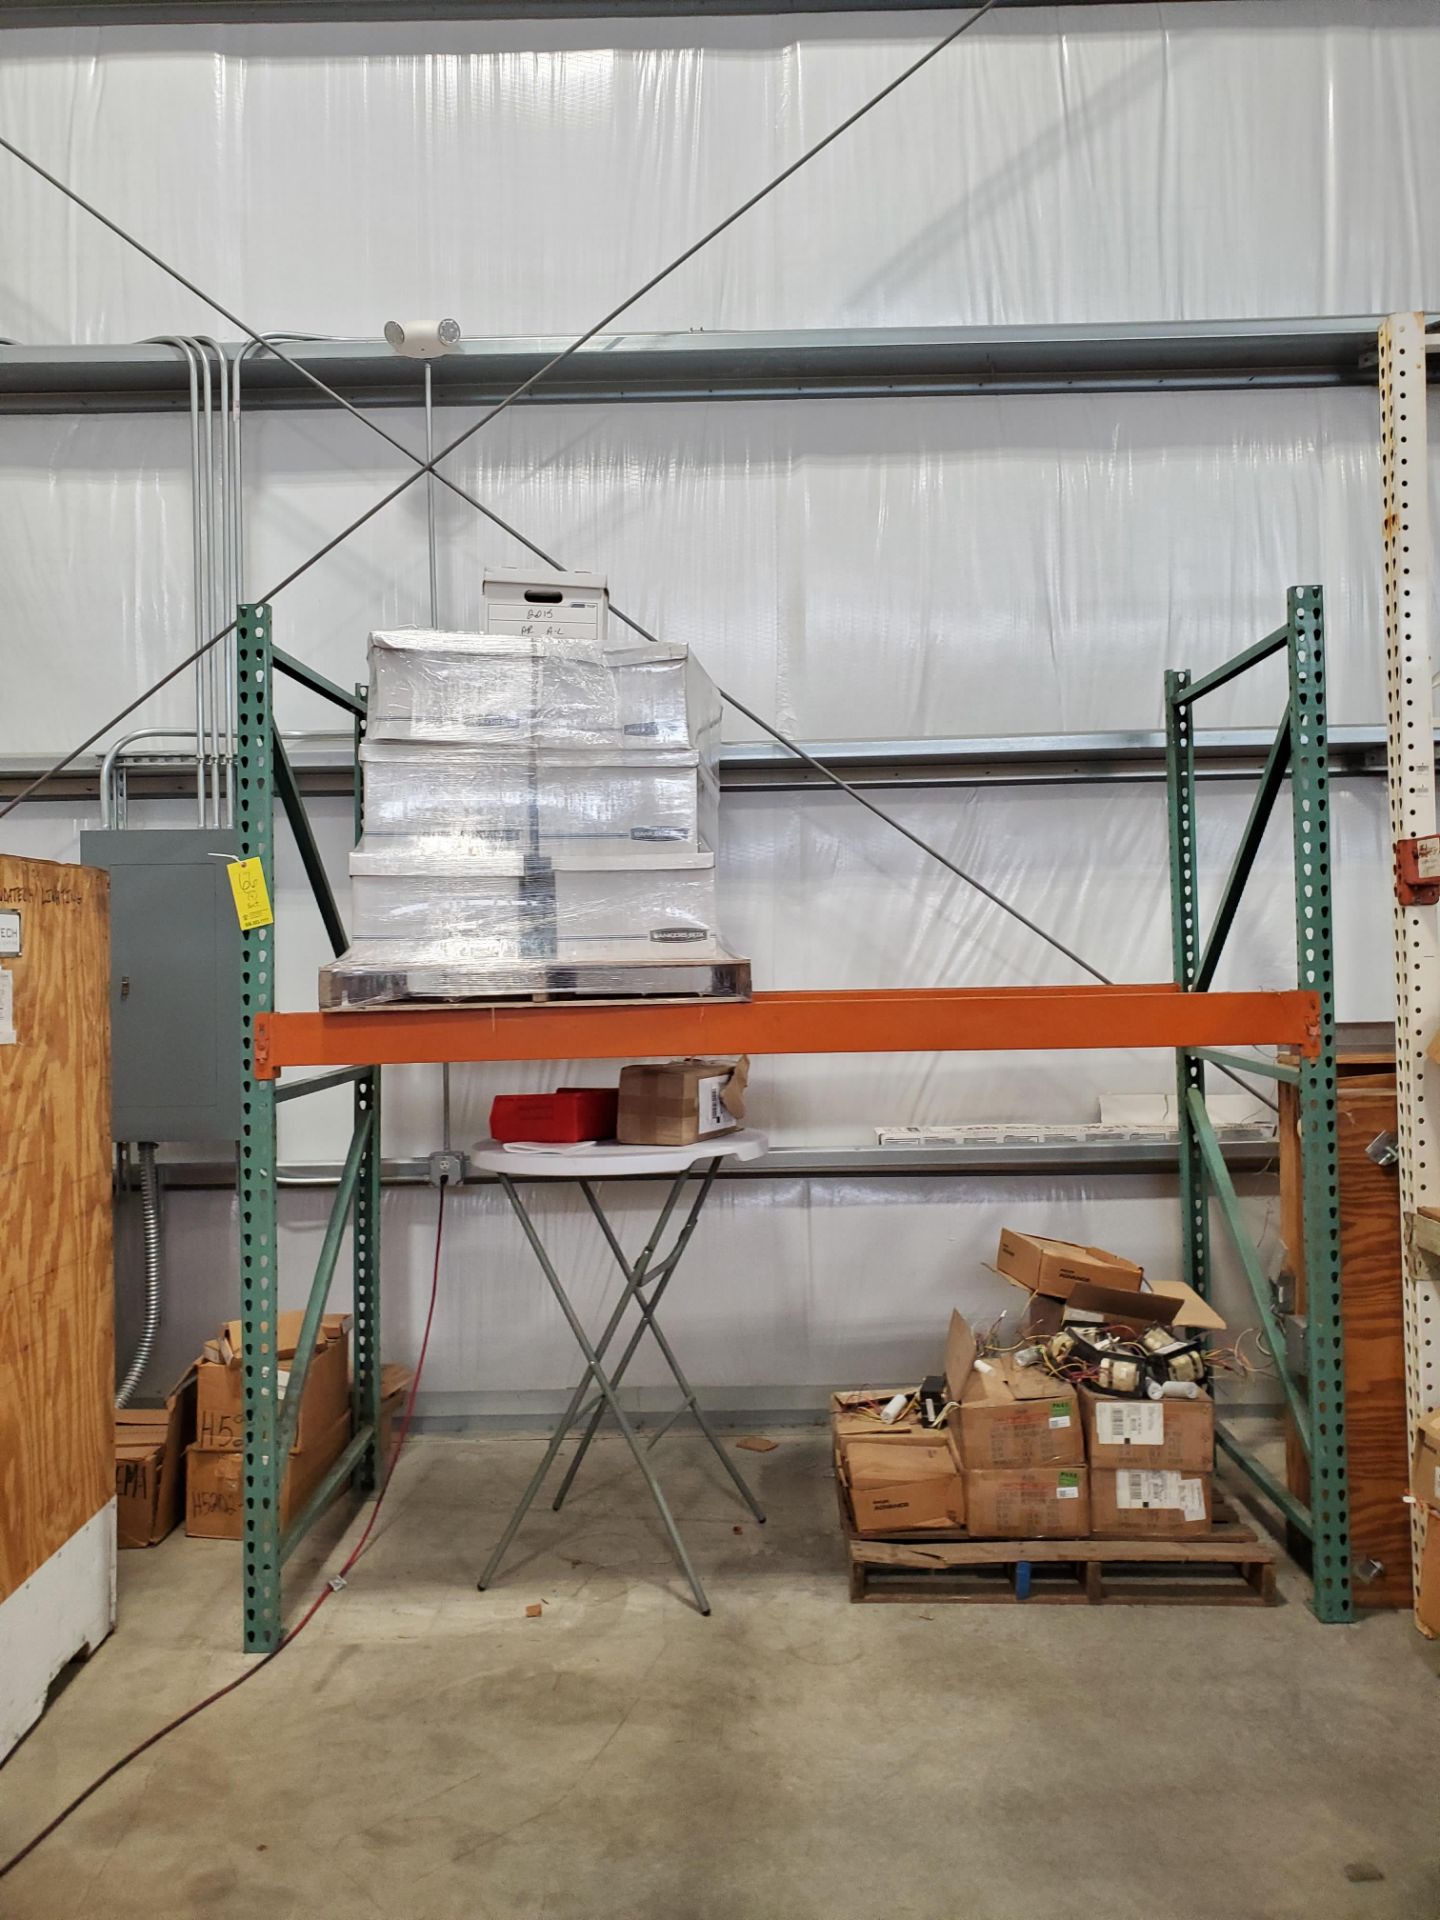 4 Sections Of Pallet Racks (4) 10'x42" Uprights; (4) 9' Crossbeams (Contents Excluded) - Image 5 of 8